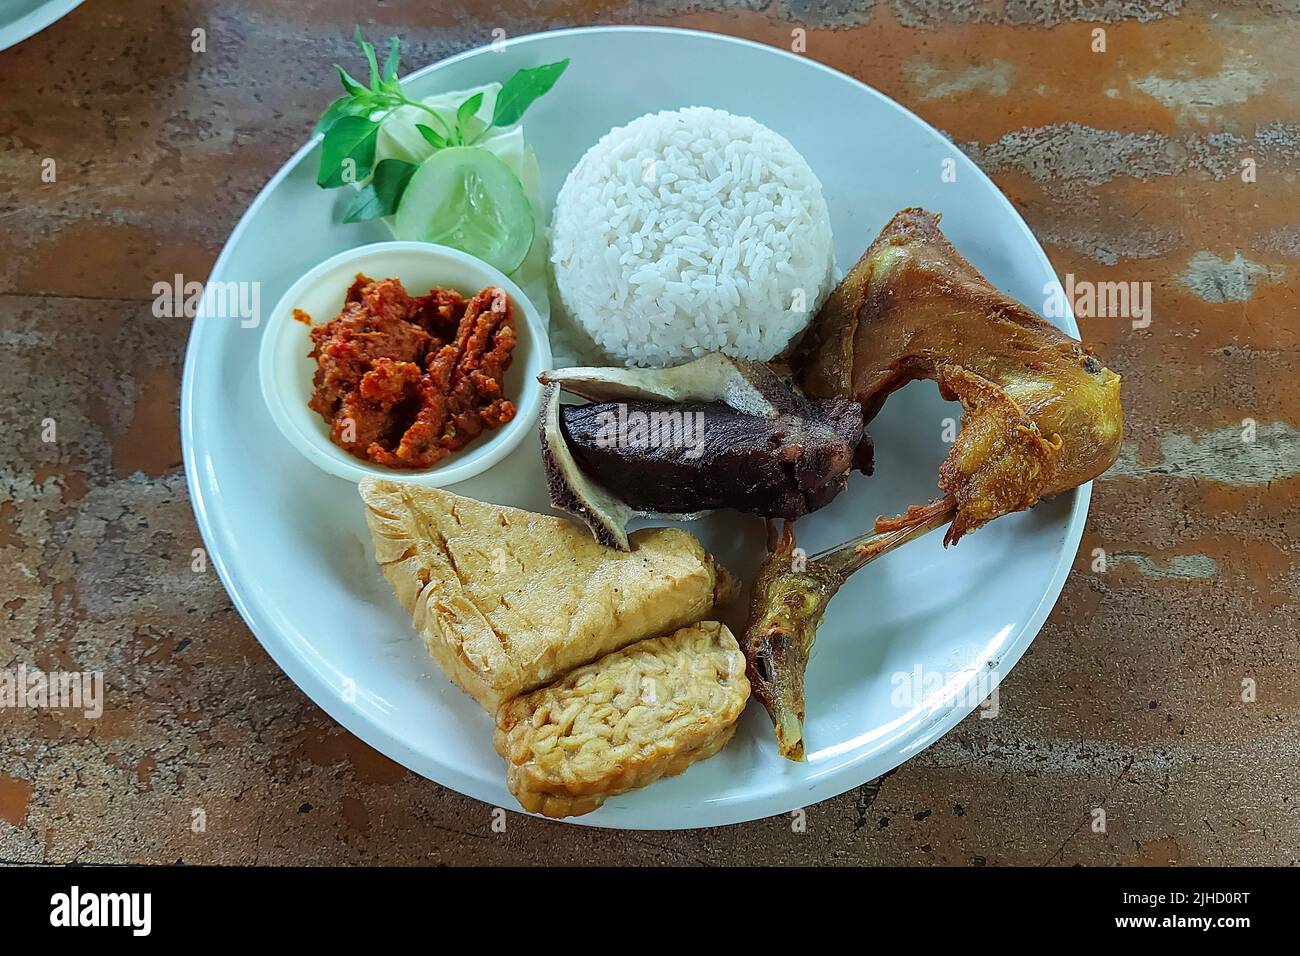 Fried Beef Ribs and Fried Chicken at Resto Jakarta, Indonesia Stock Photo